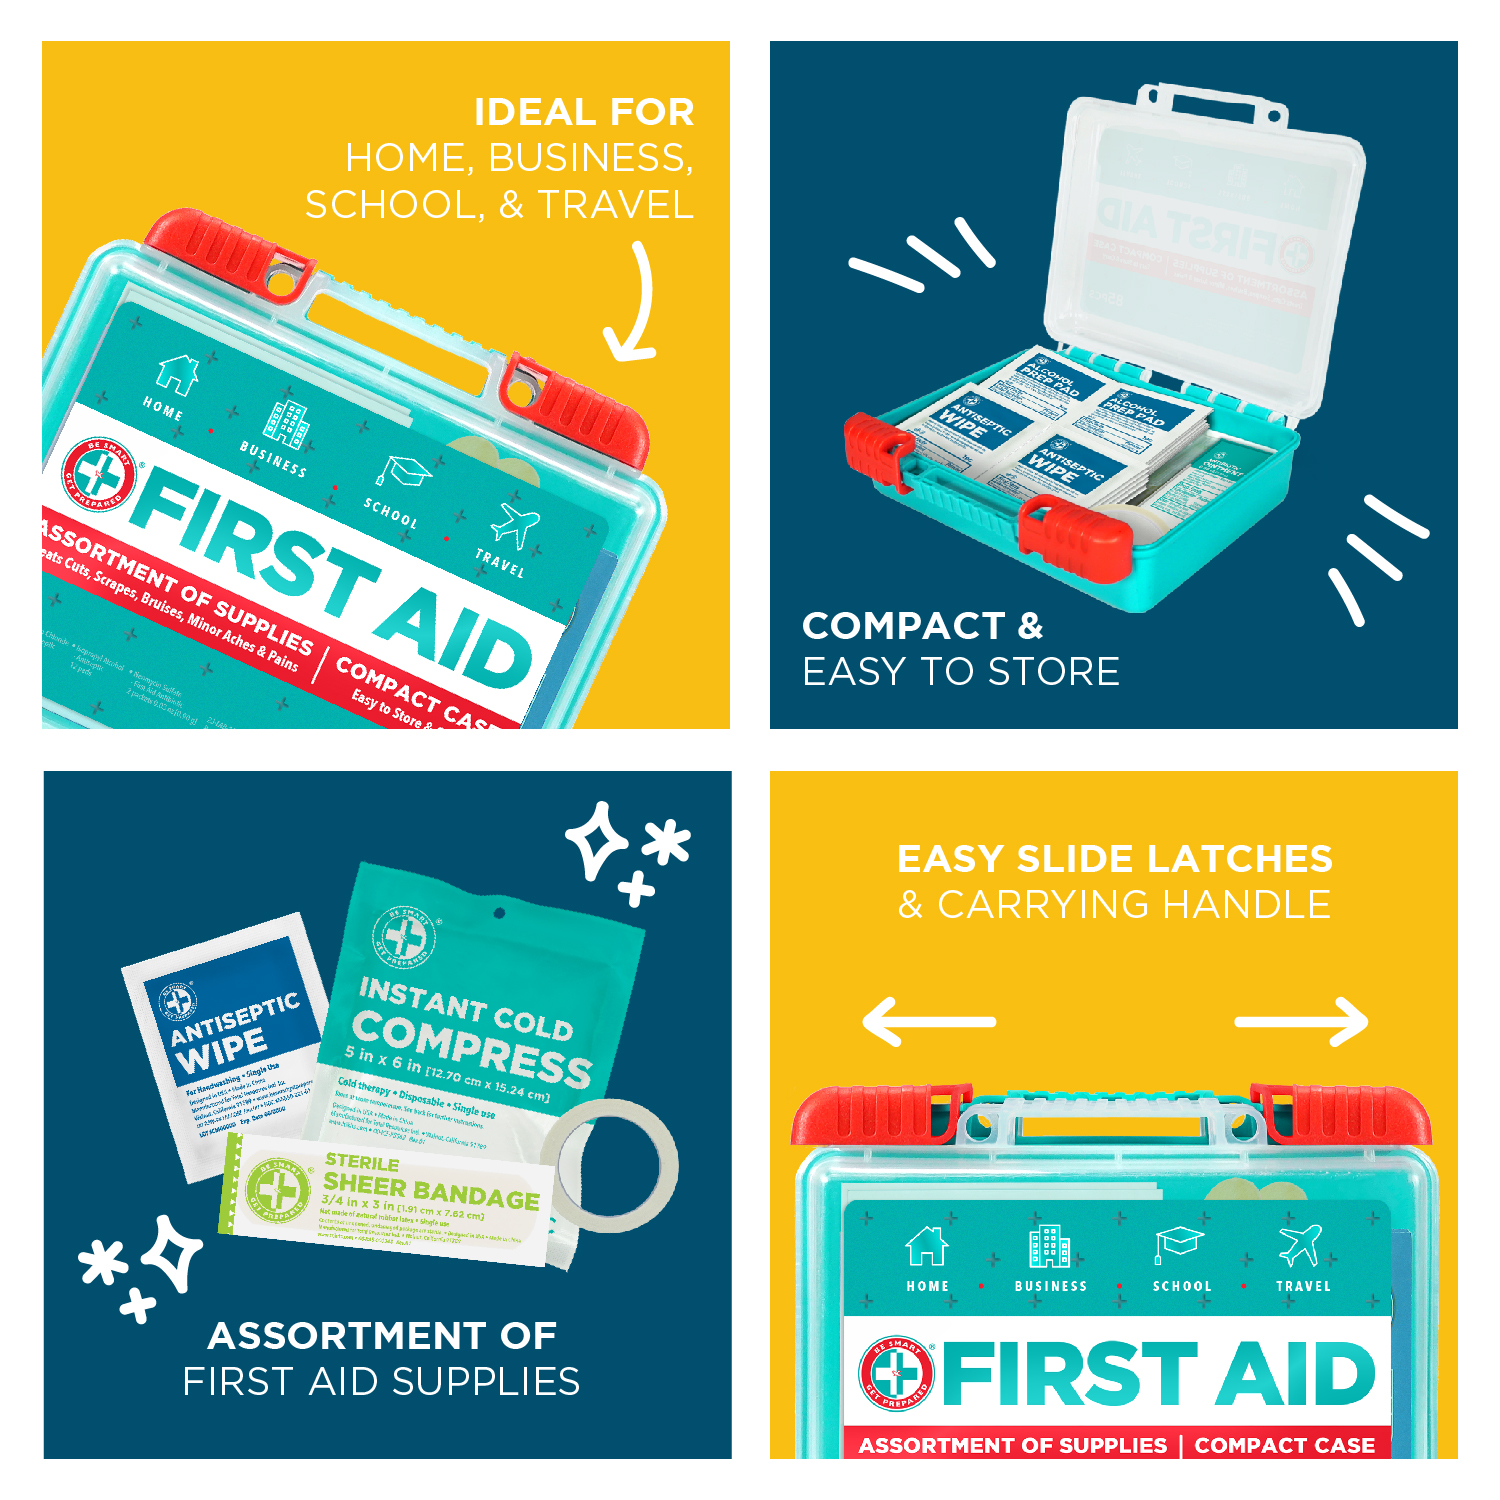 Be Smart Get Prepared First Aid Kit, 85 count - image 5 of 7